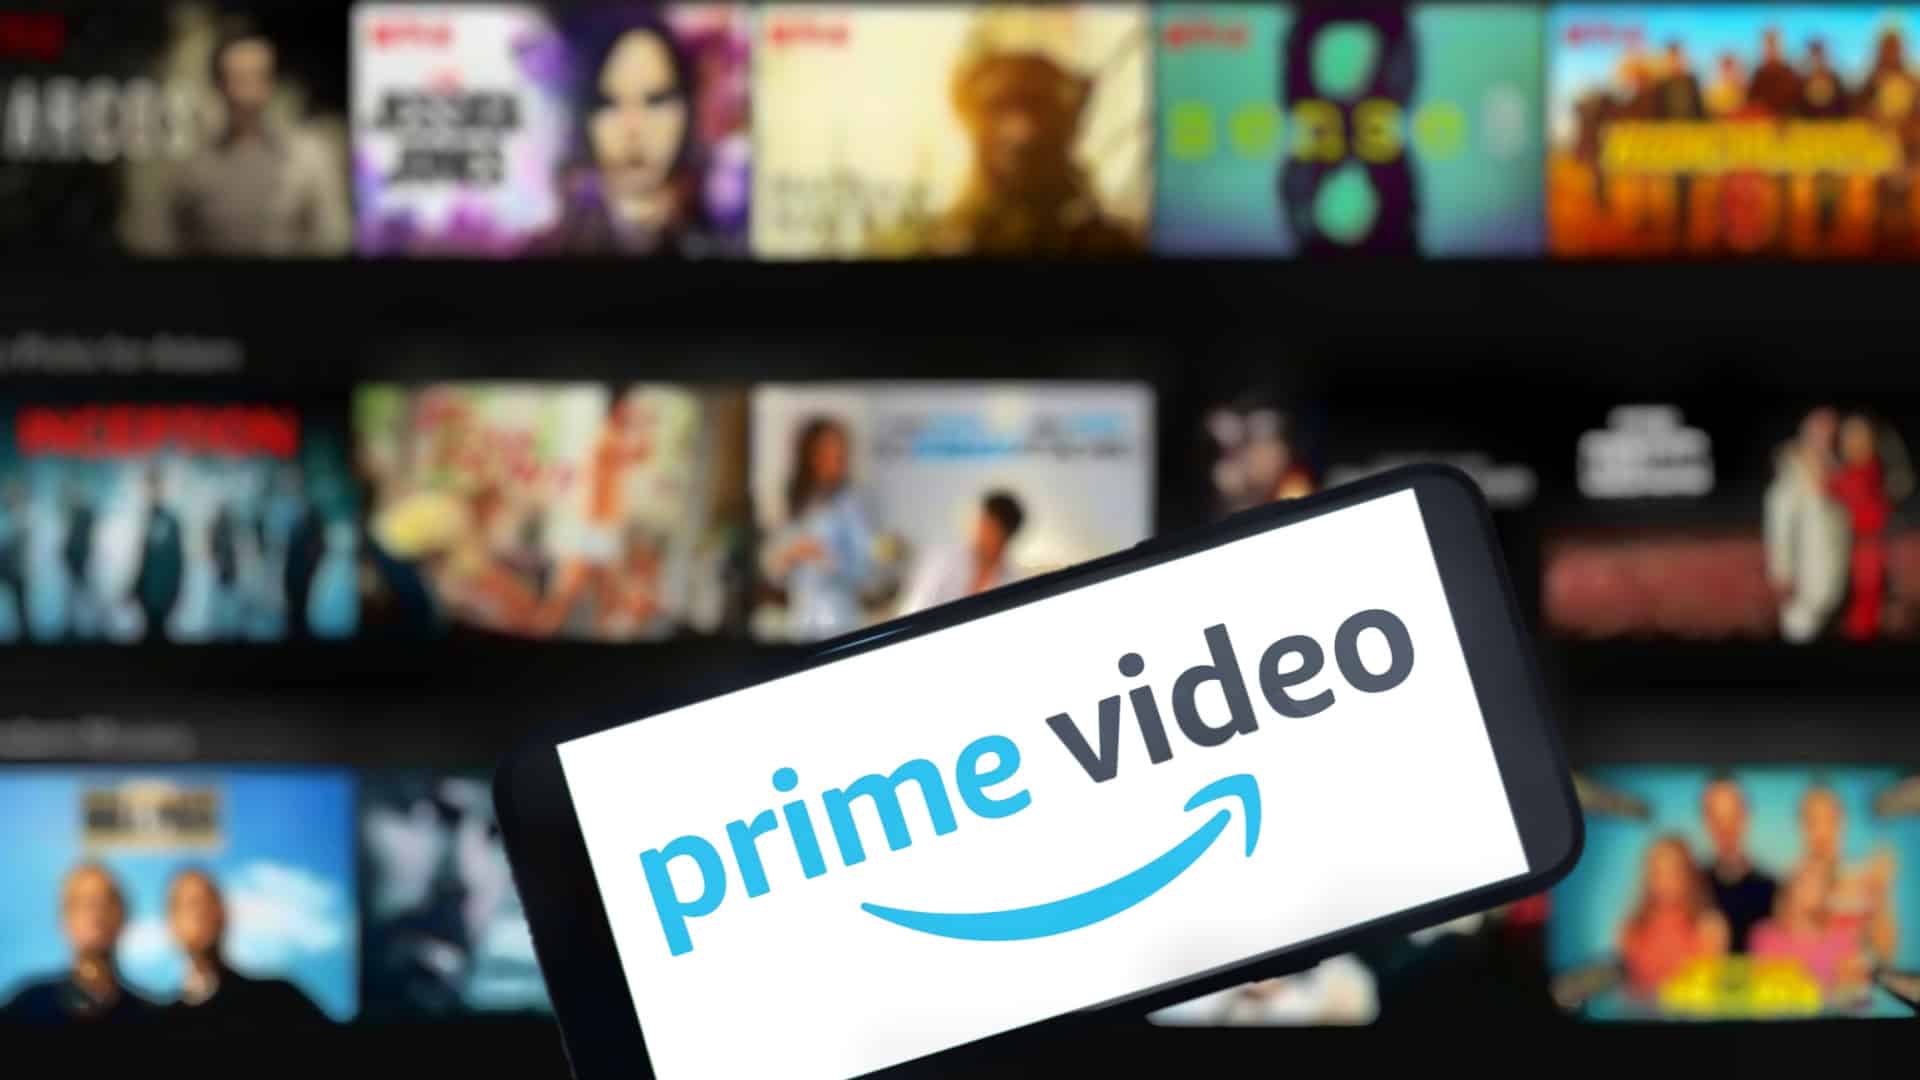 Amazon may launch ads on Prime Video